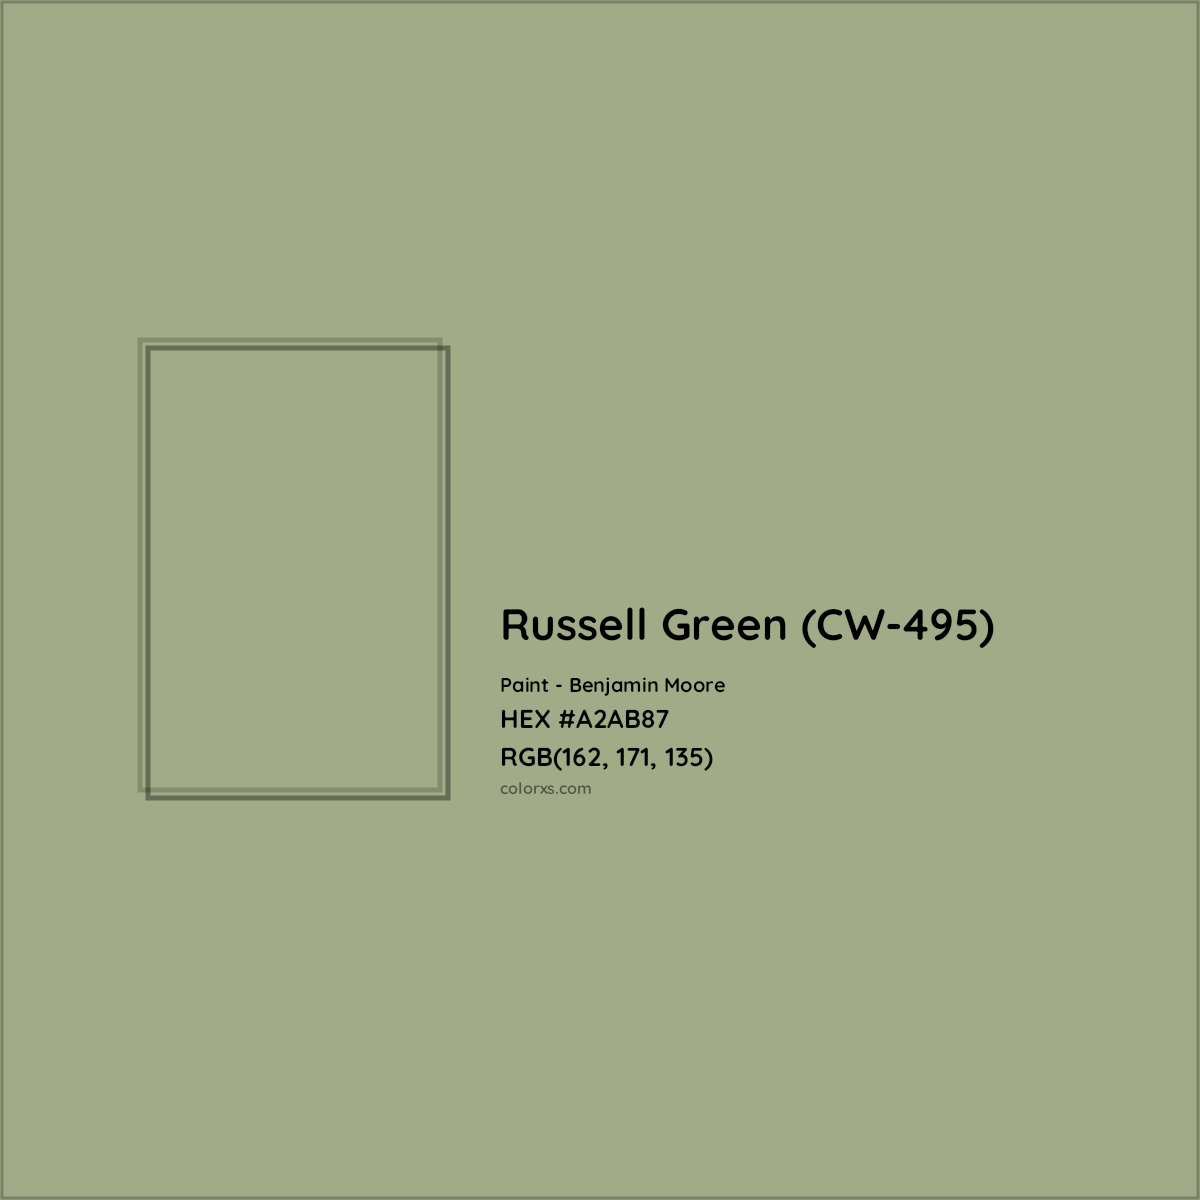 HEX #A2AB87 Russell Green (CW-495) Paint Benjamin Moore - Color Code